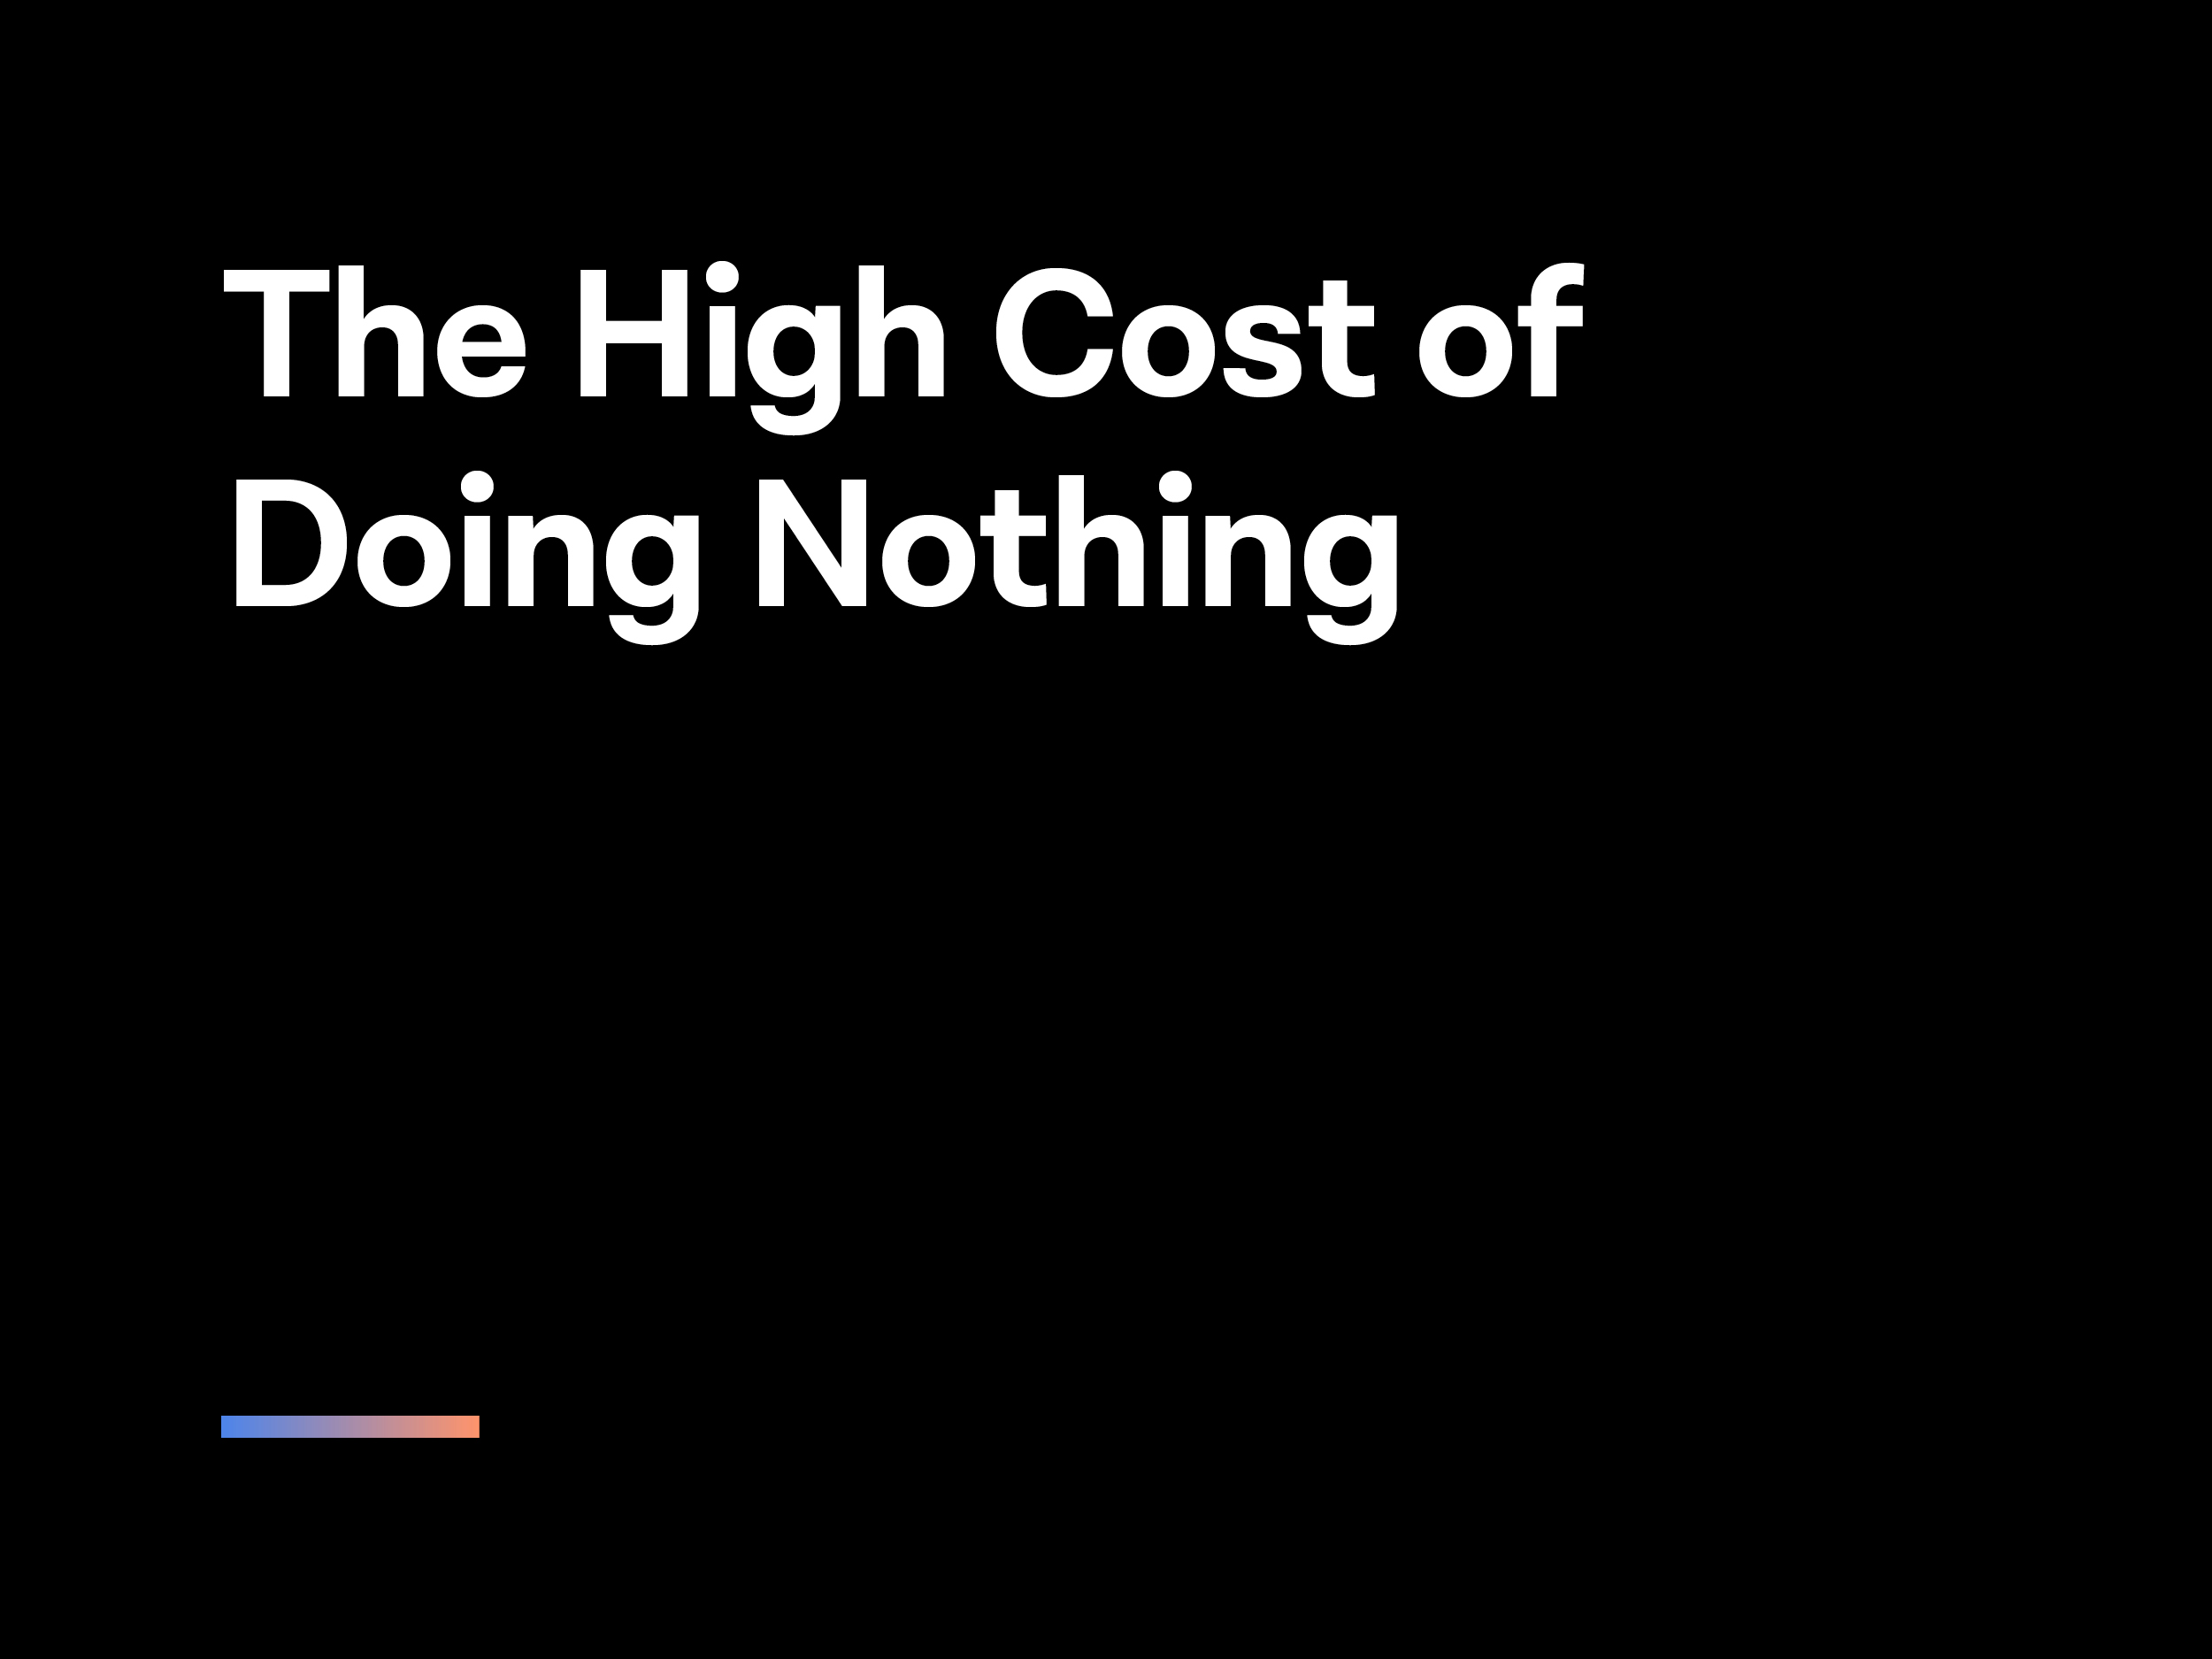 c365-ebook-the-high-cost-of-doing-nothing